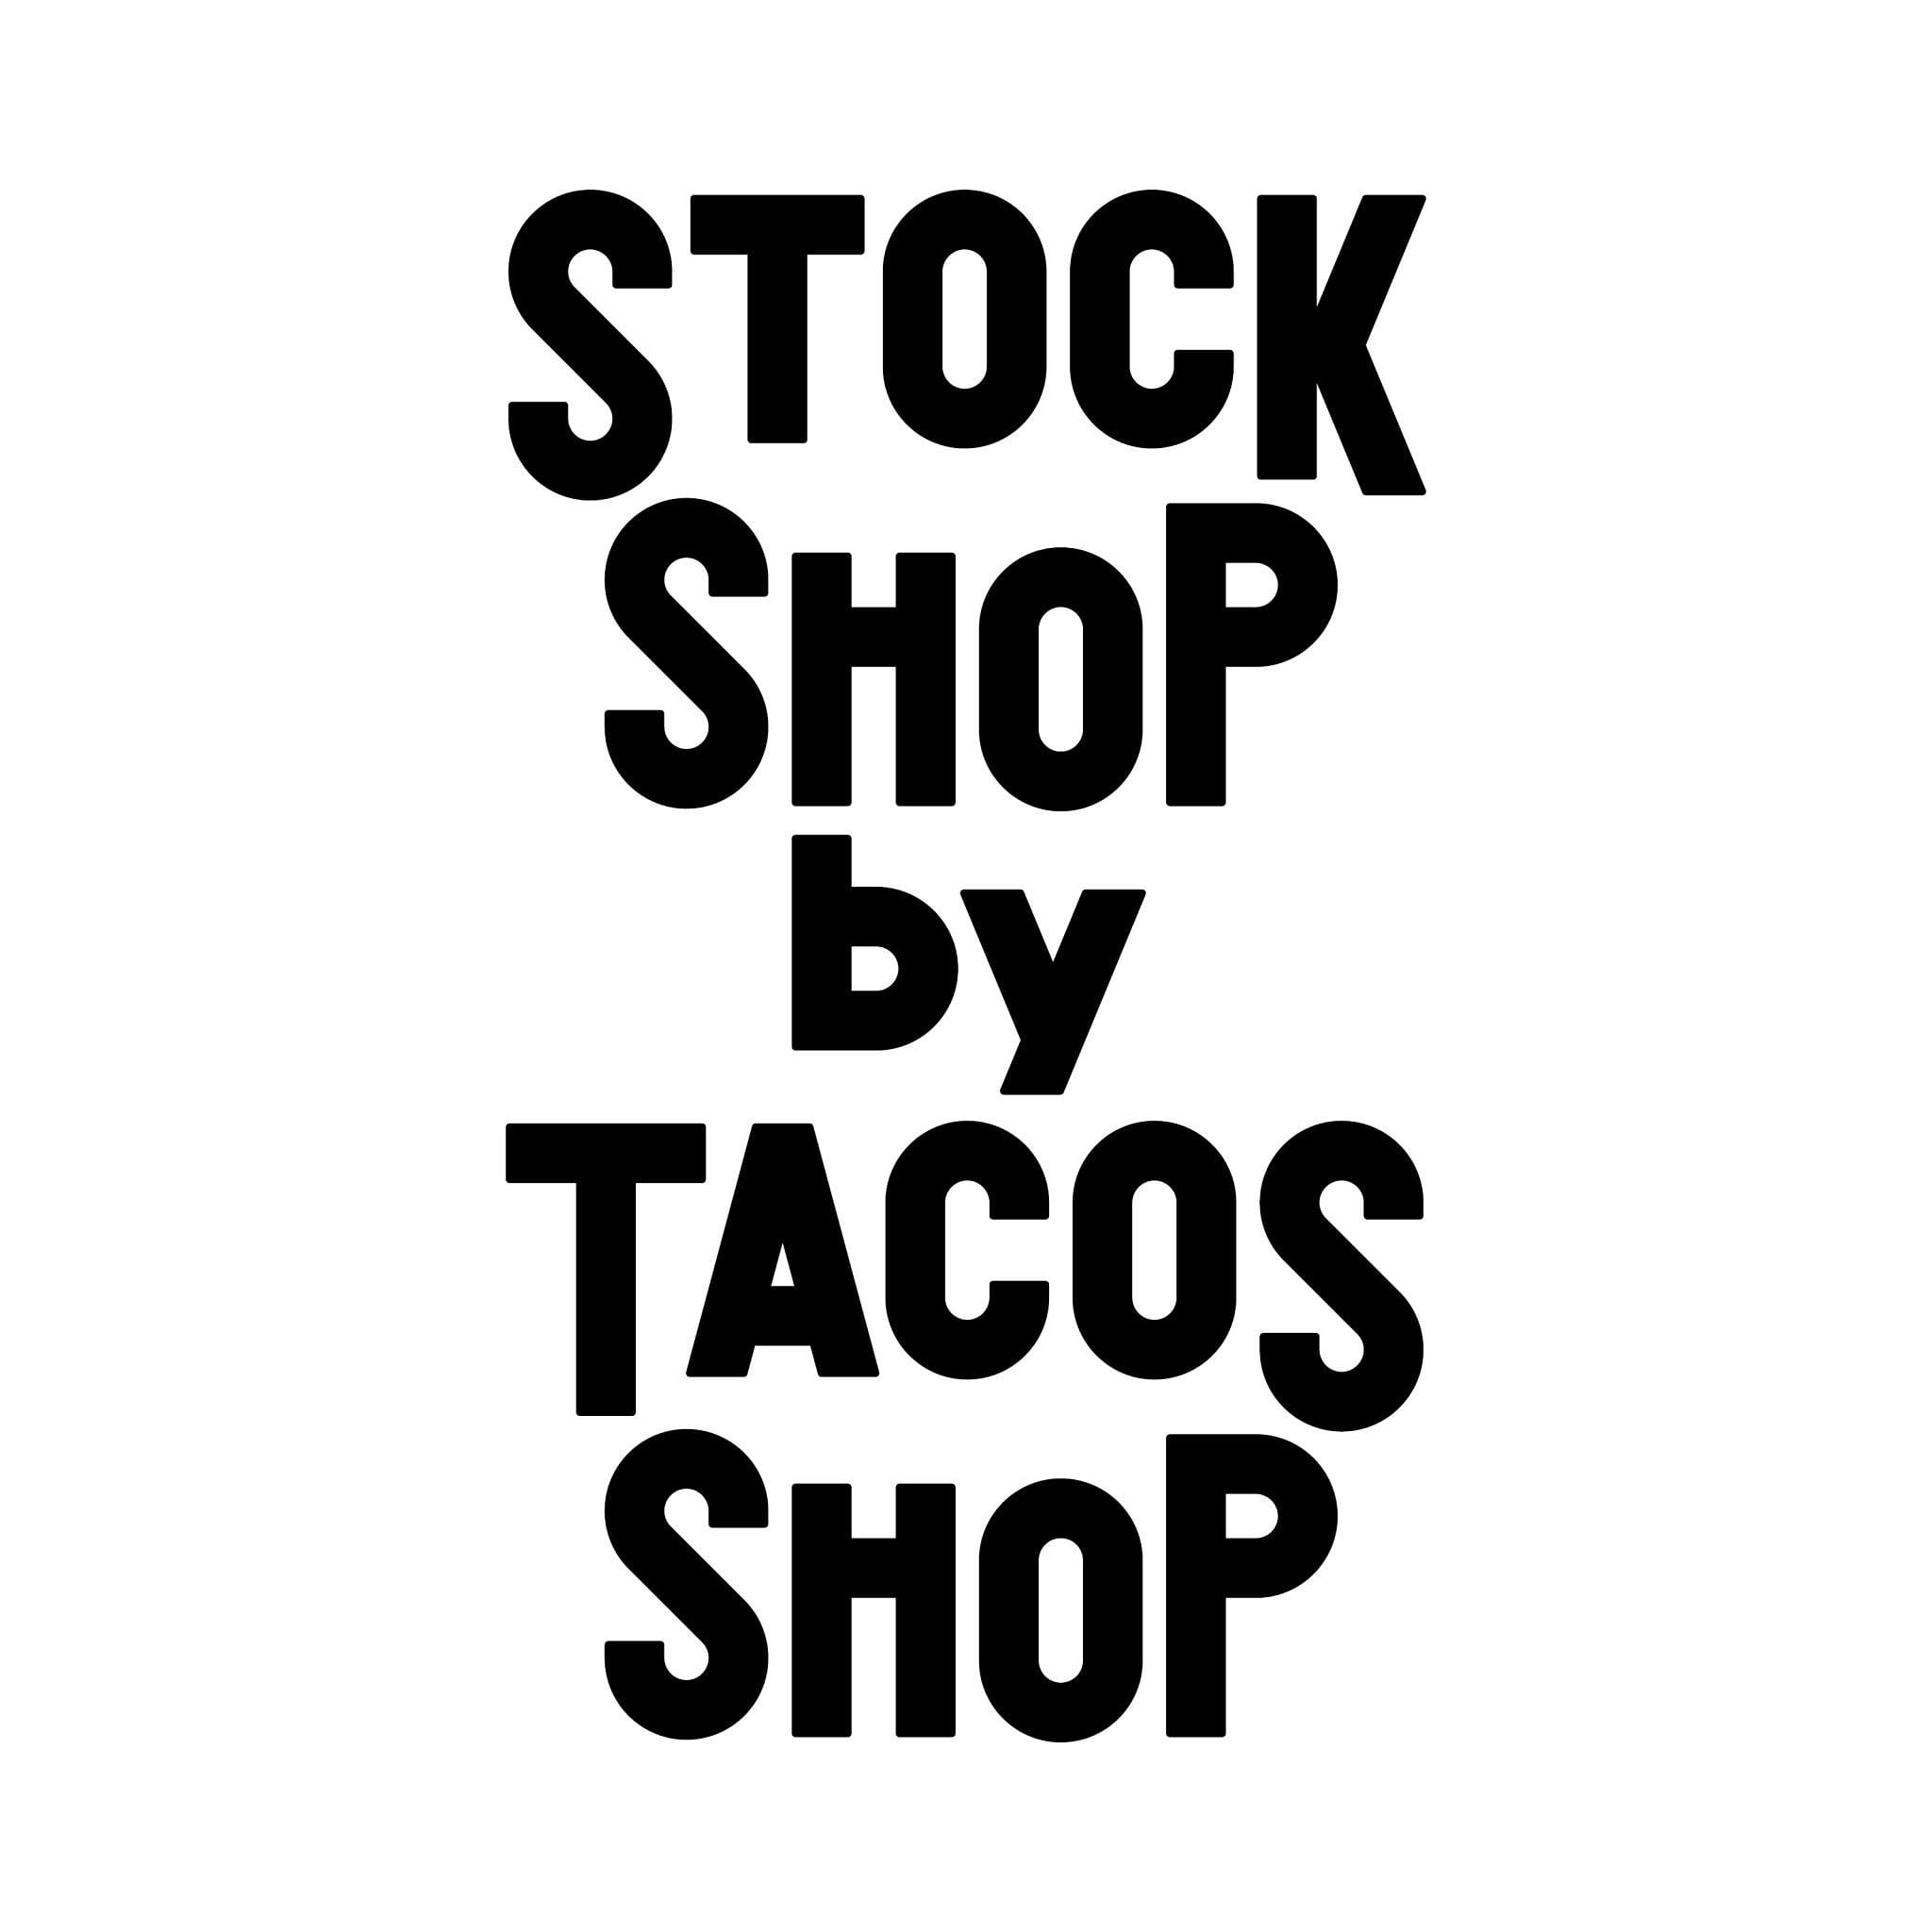 STOCK Shop by TACOS Shop